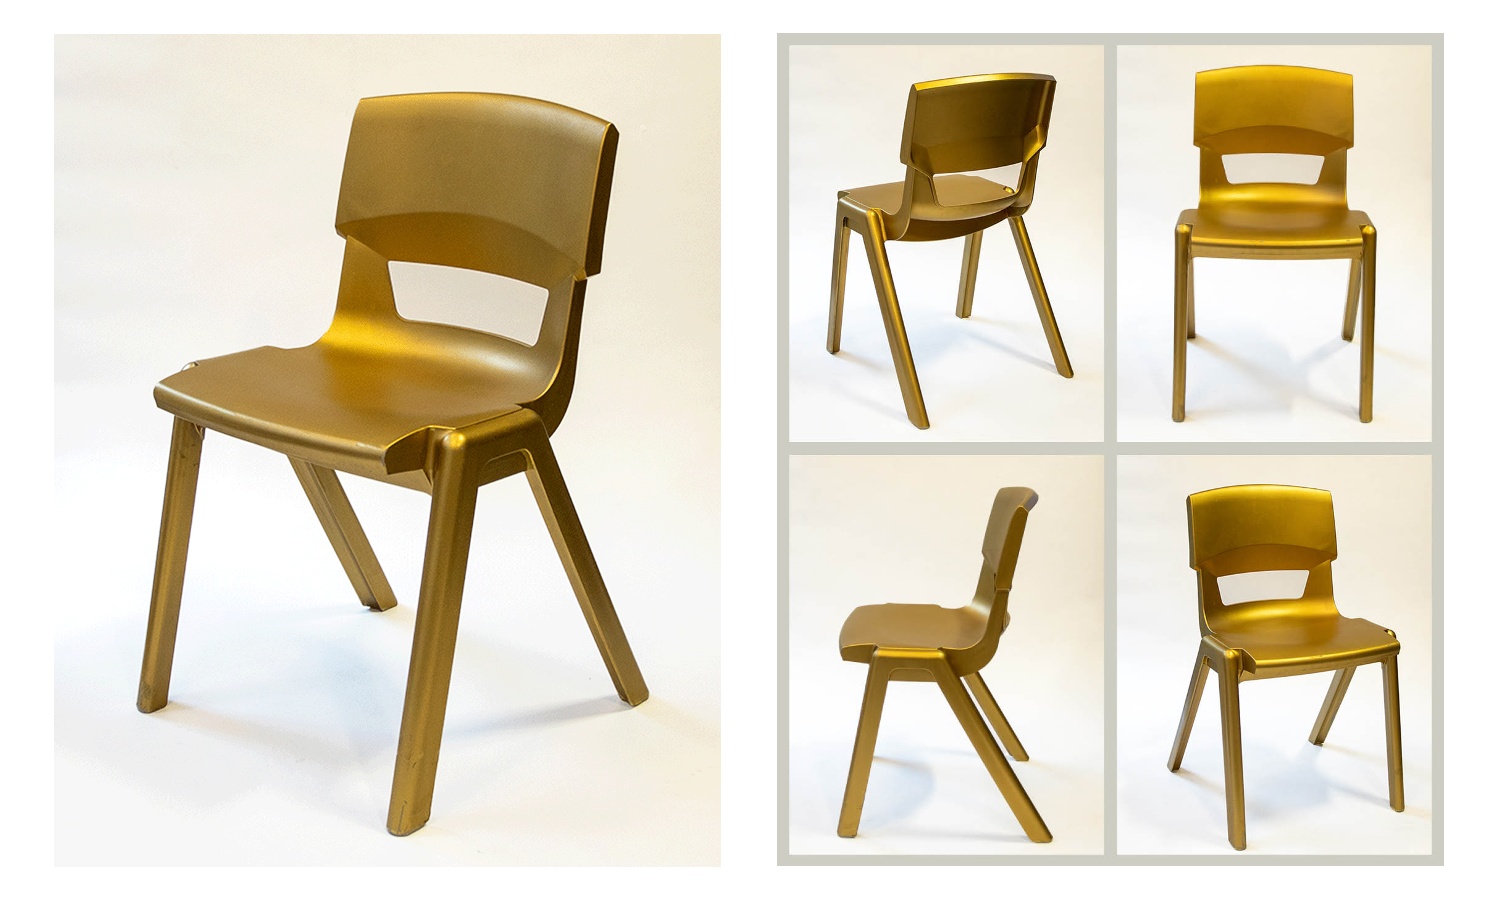 Find one of KI’s Gold Postura+ chairs and win a VIP Factory Tour